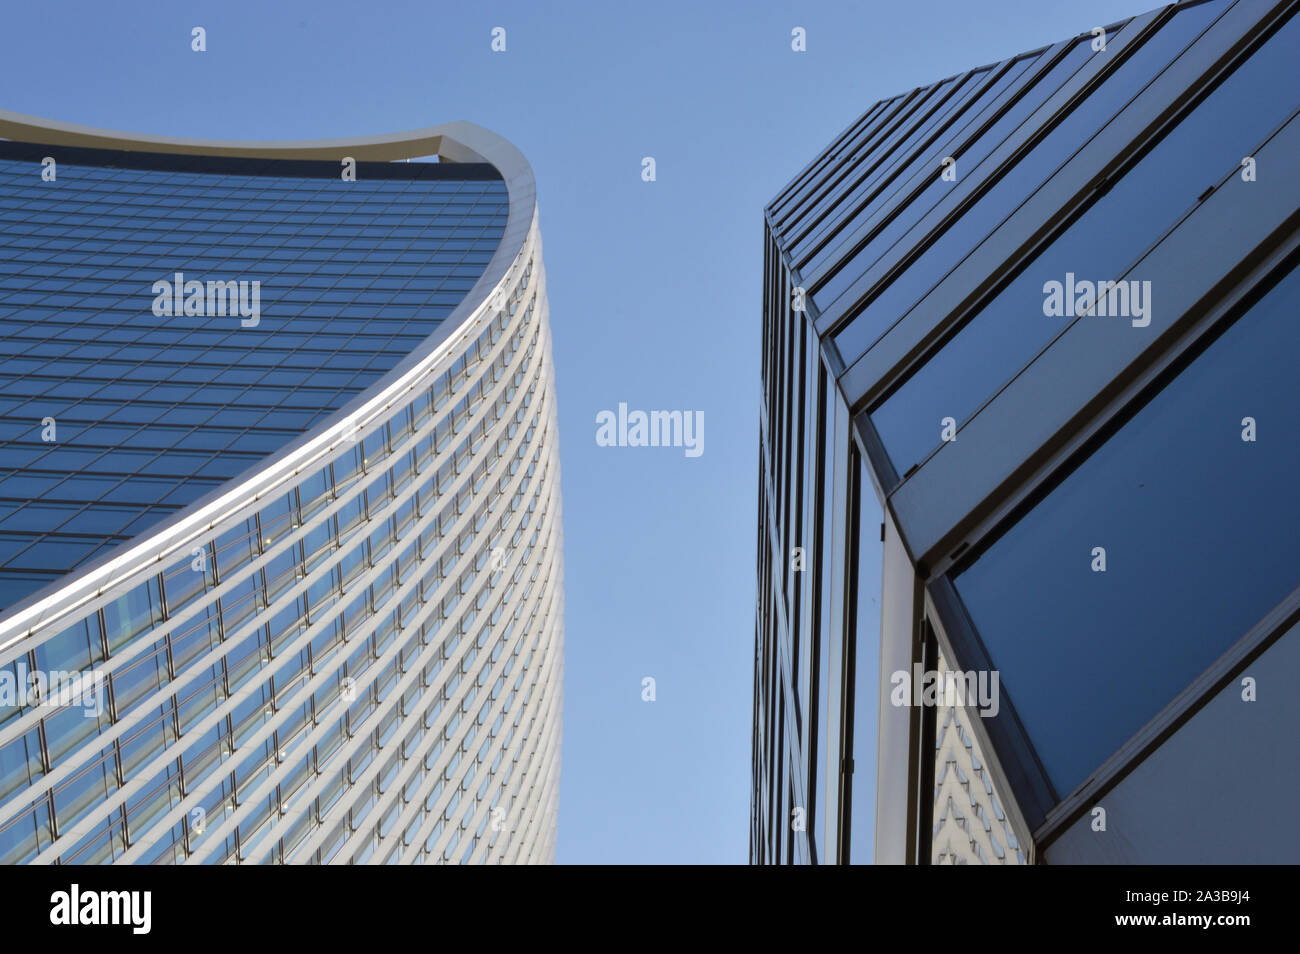 London/UK - August 23, 2019: Low angle view of modern buildings in Fenchurch street London Stock Photo